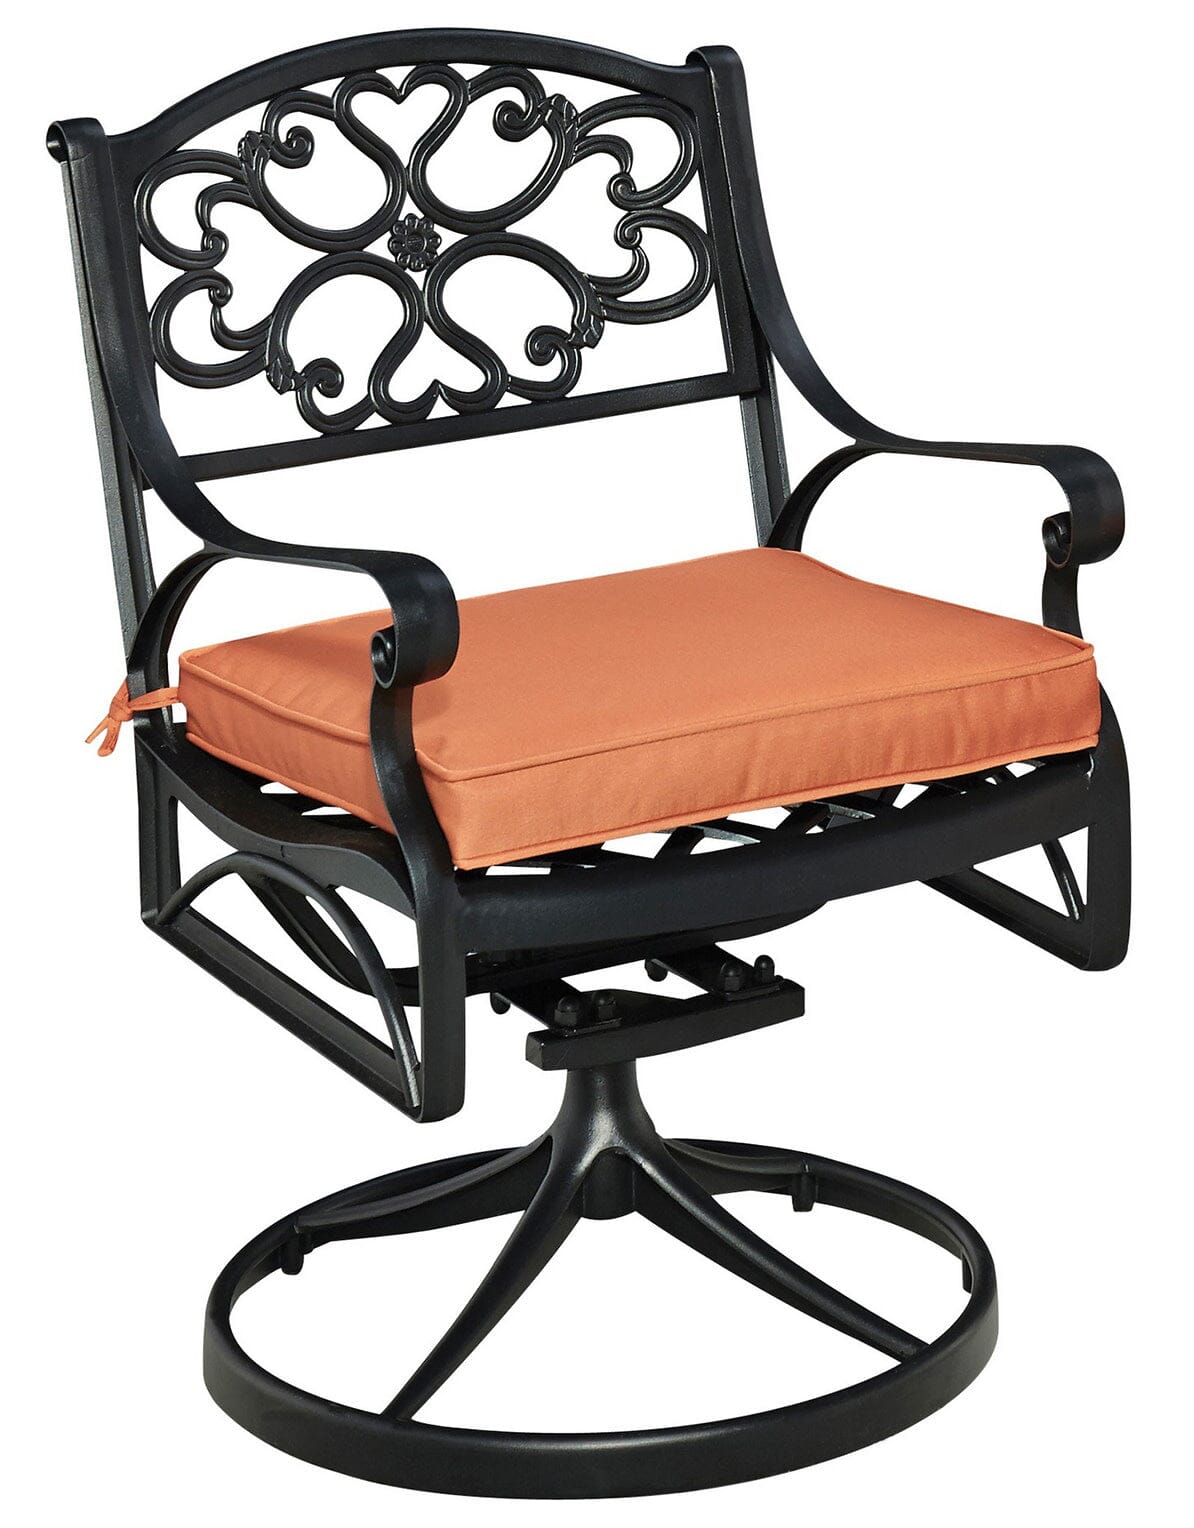 Traditional Outdoor Swivel Rocking Chair By Sanibel Outdoor Seating Sanibel